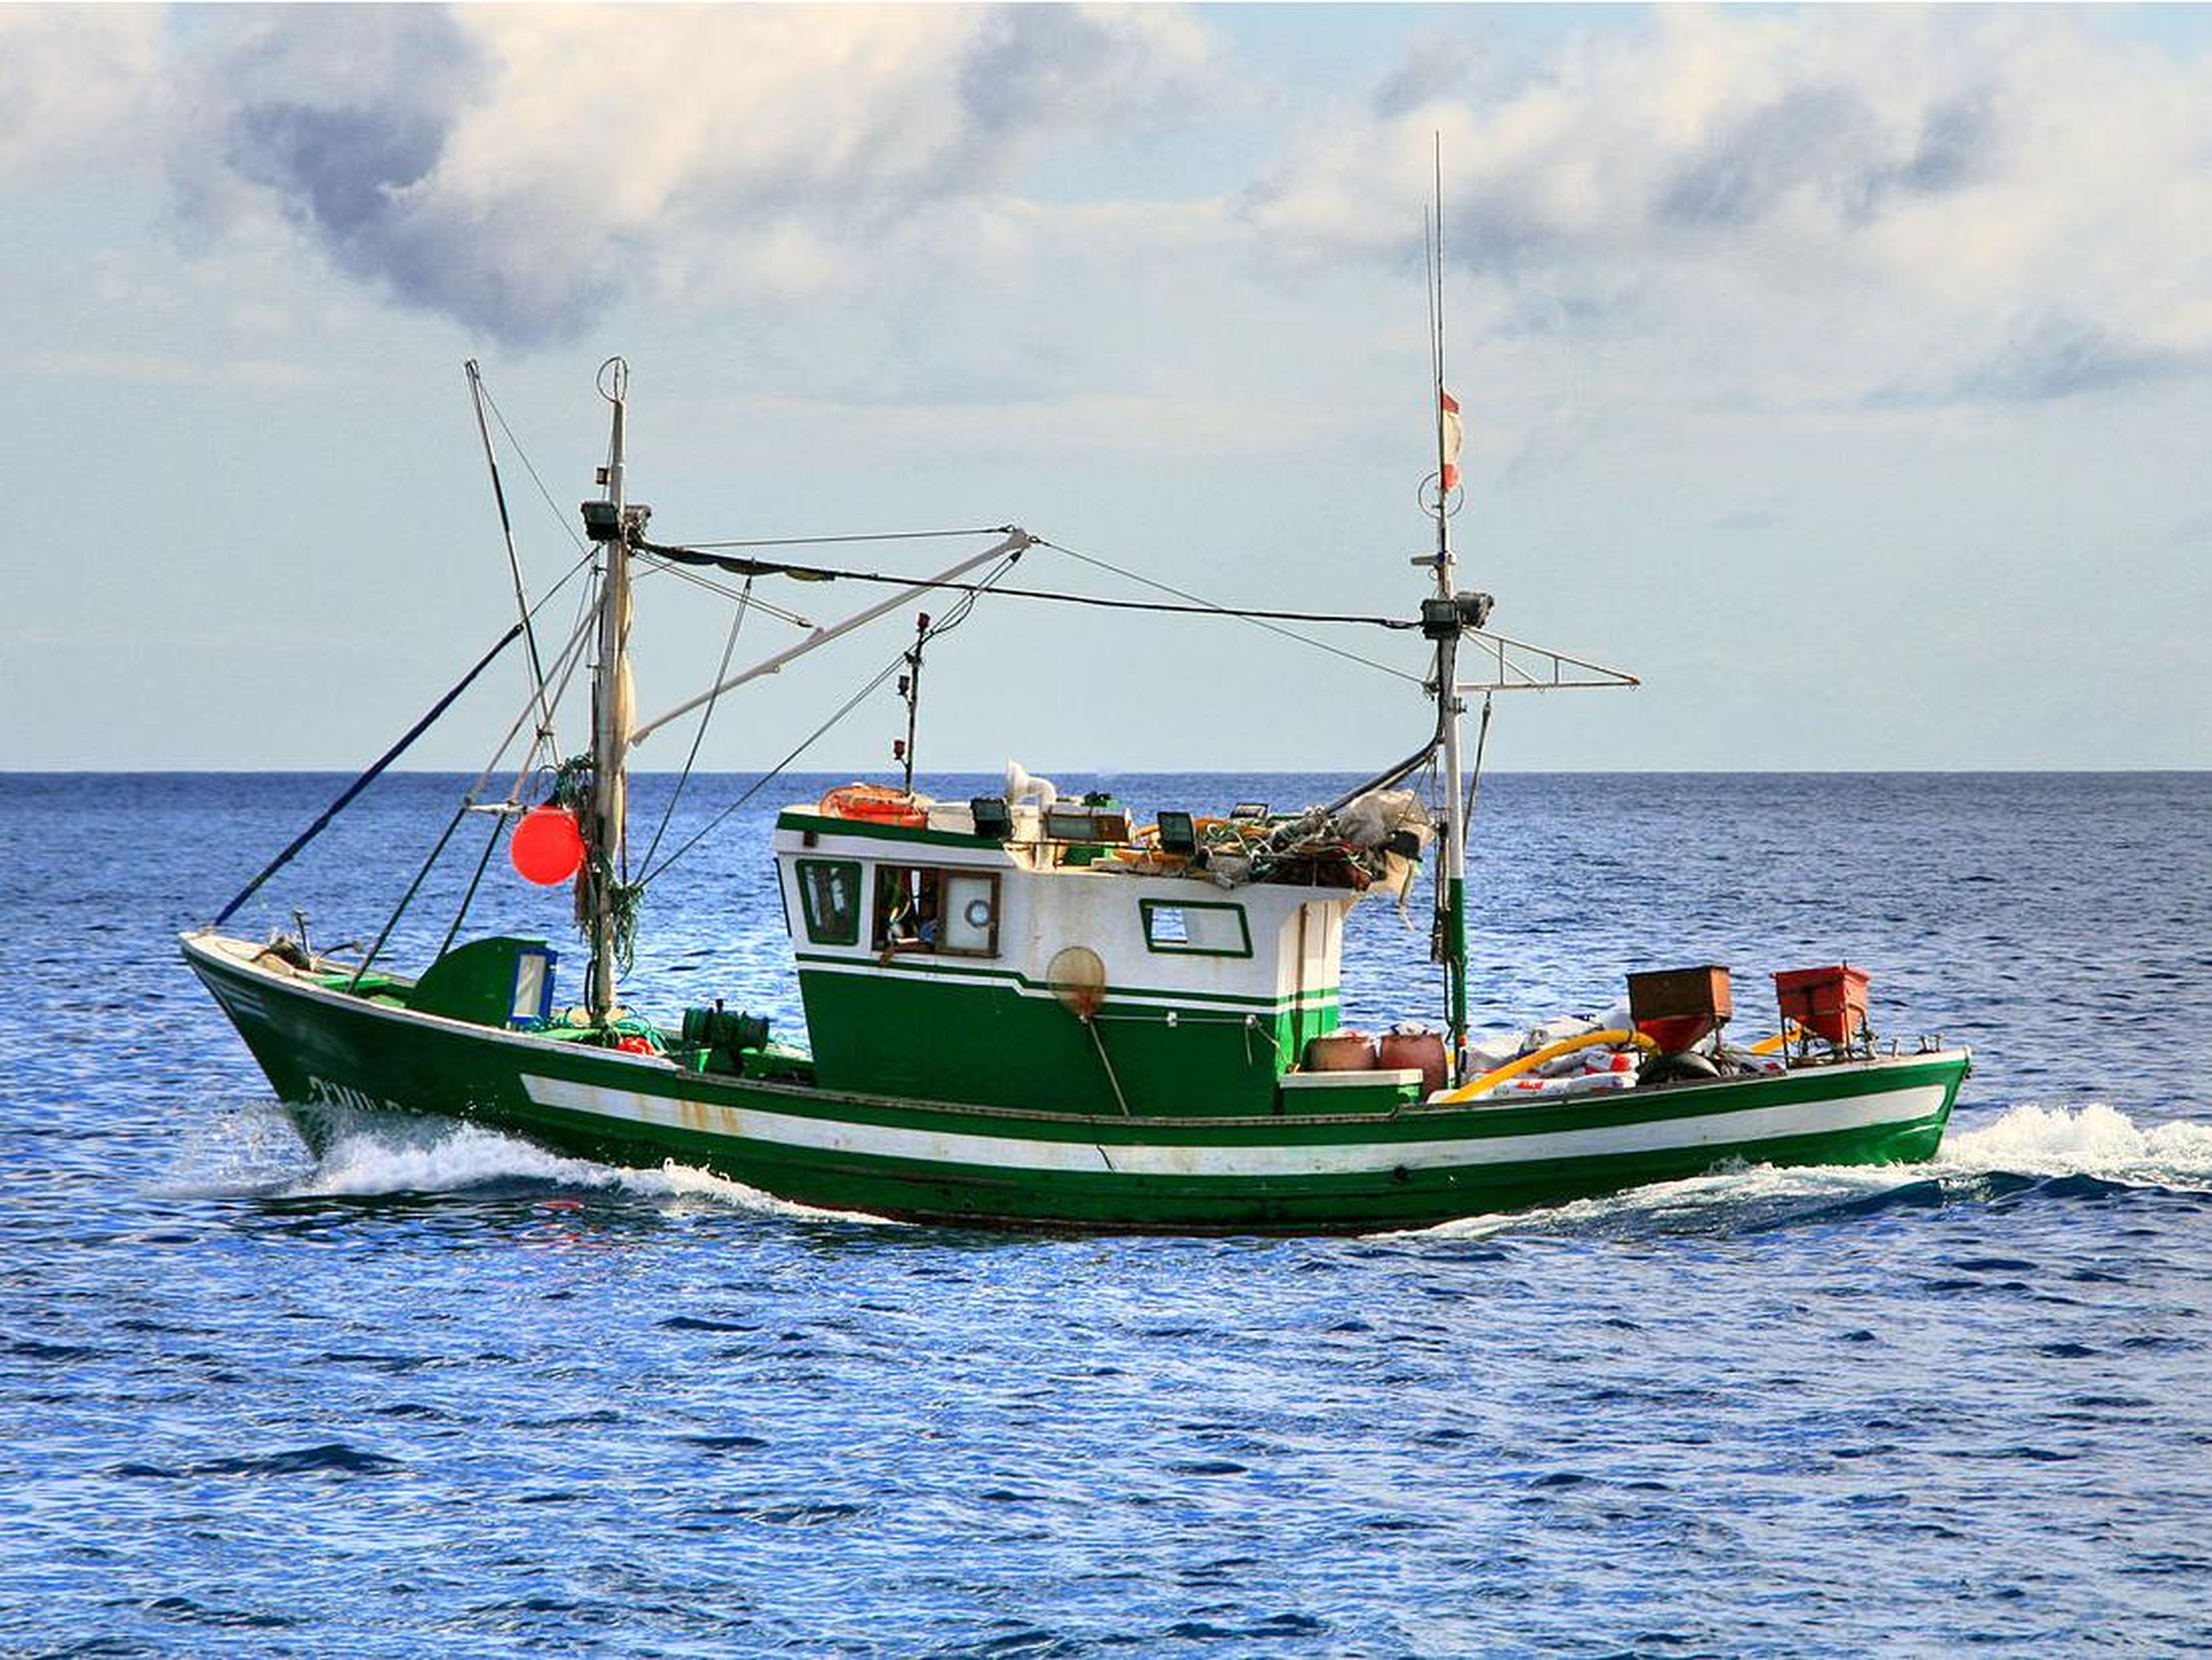 Two are fishing vessels provided by the fishing company Ovenstones, which only carry 12 passengers each.